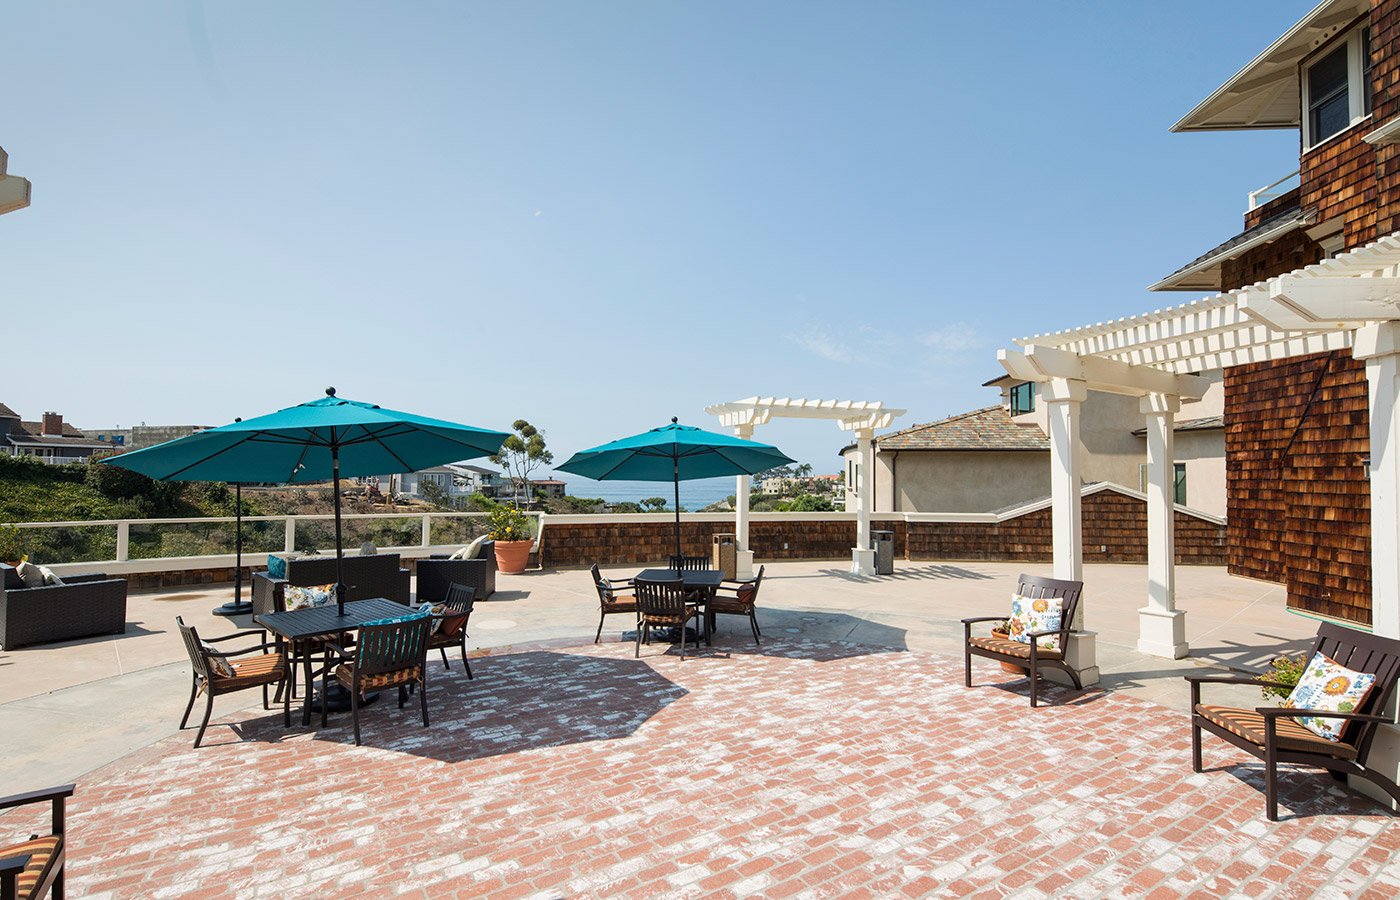 Patio area at Crown Cove.